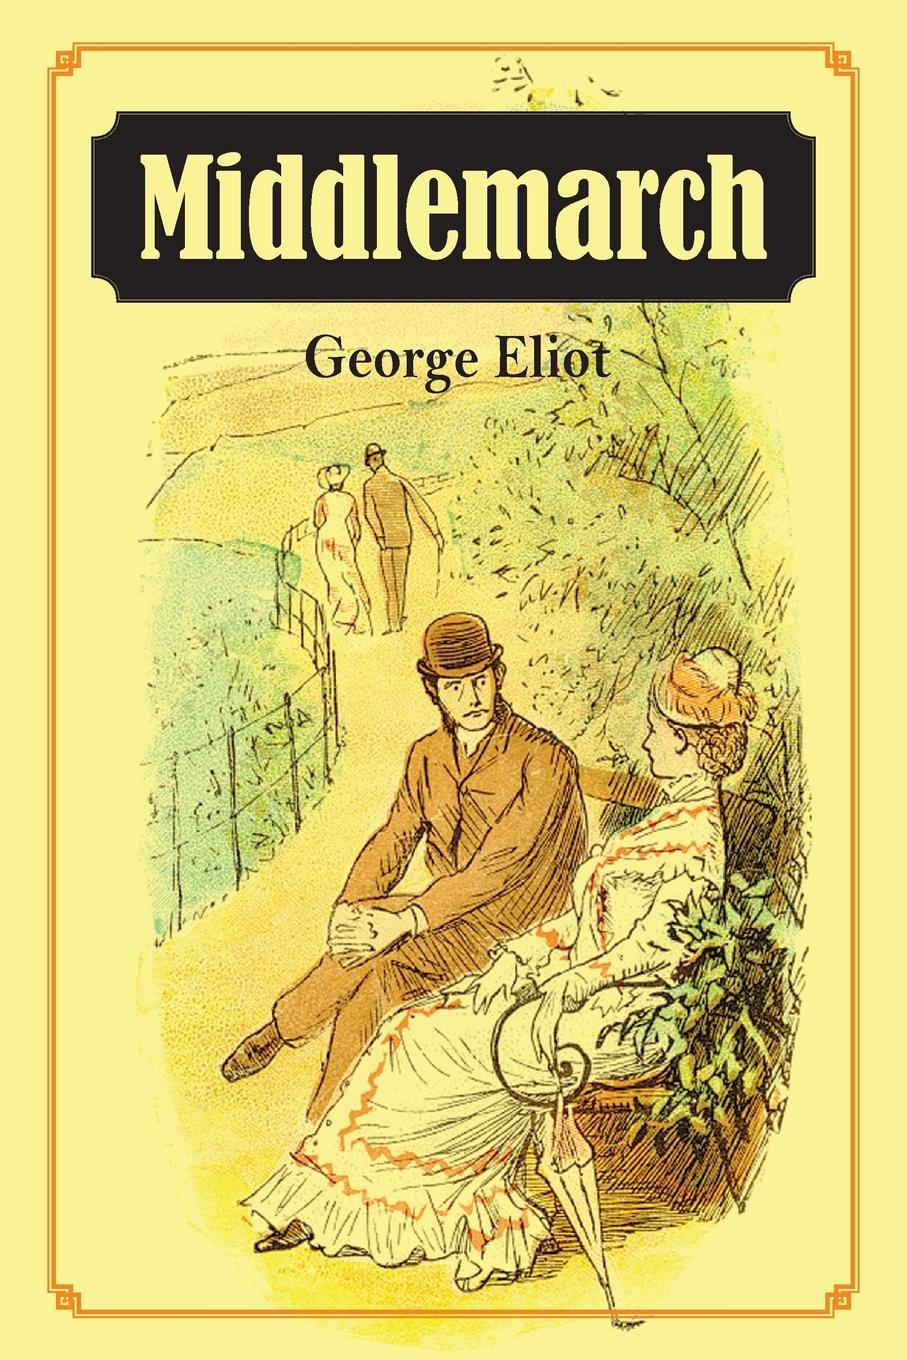 Middlemarch - Eliot, George